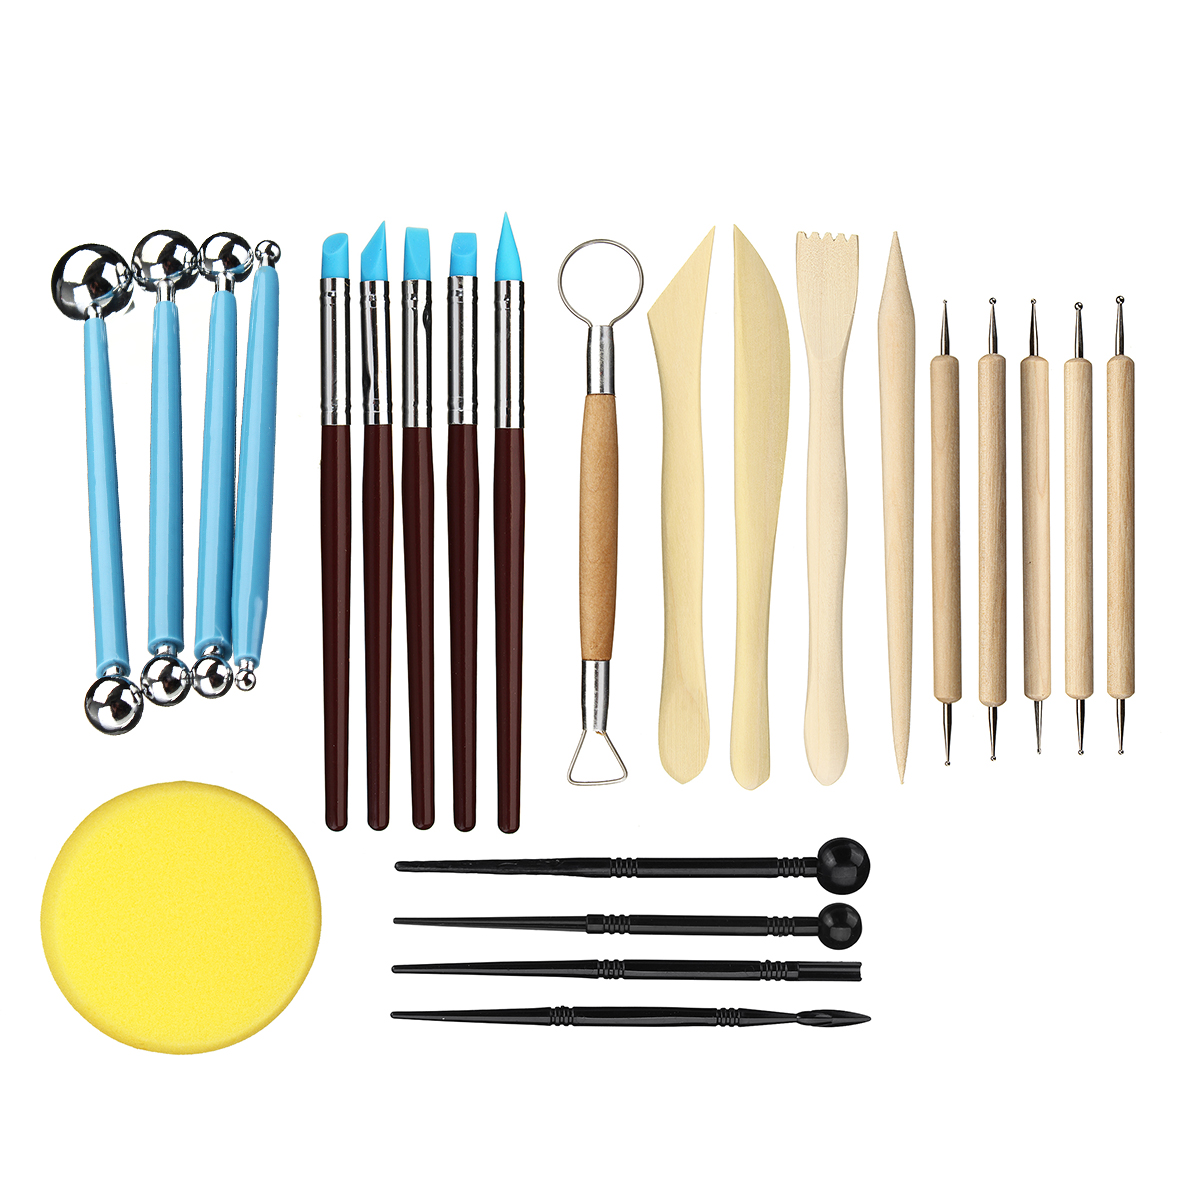 24pcs-Ball-Stylus-Dotting-Tools-Clay-Pottery-Modeling-Carving-Rock-Painting-Kit-1450466-1